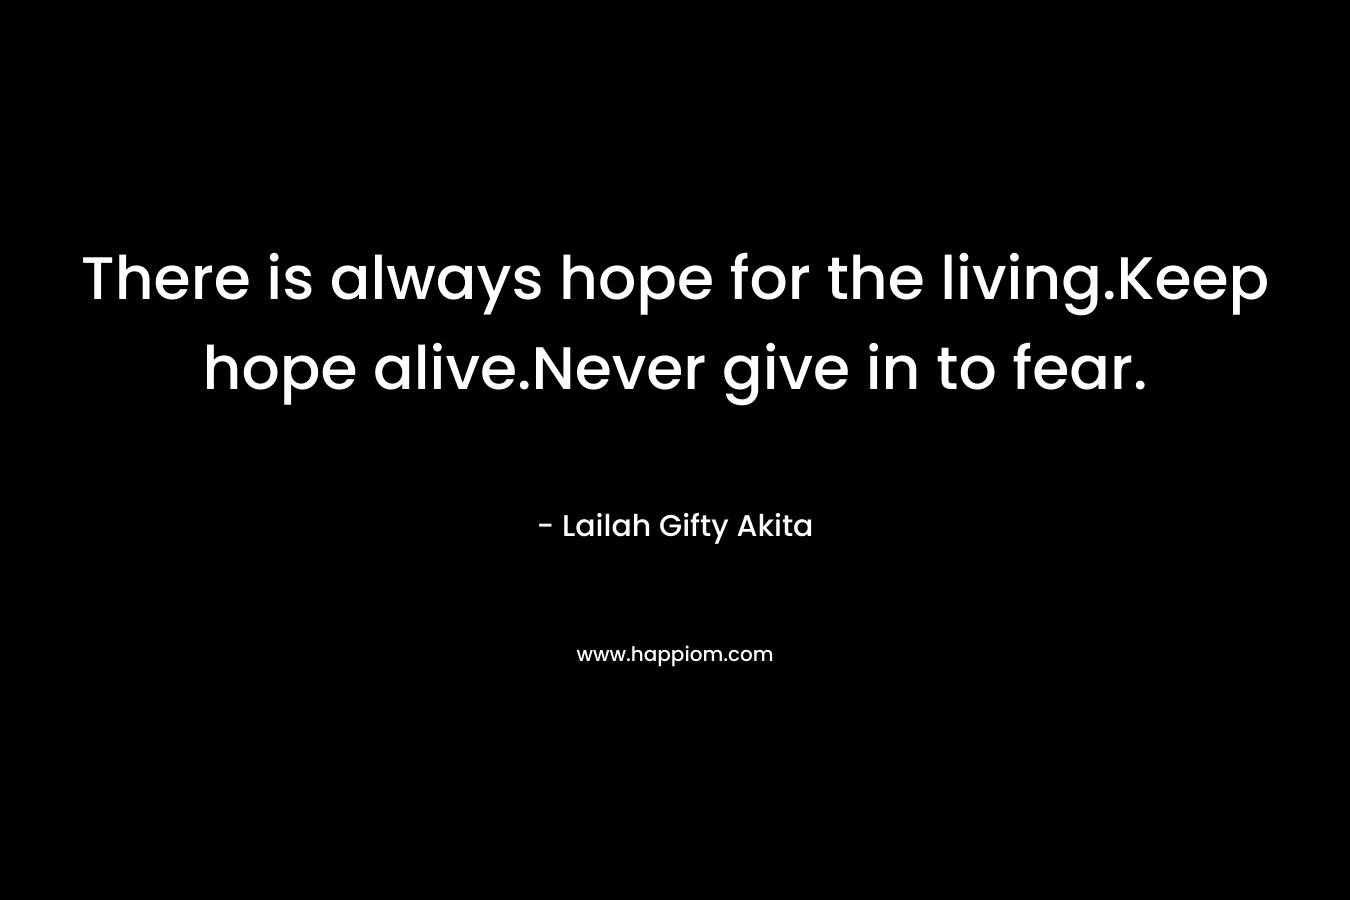 There is always hope for the living.Keep hope alive.Never give in to fear.